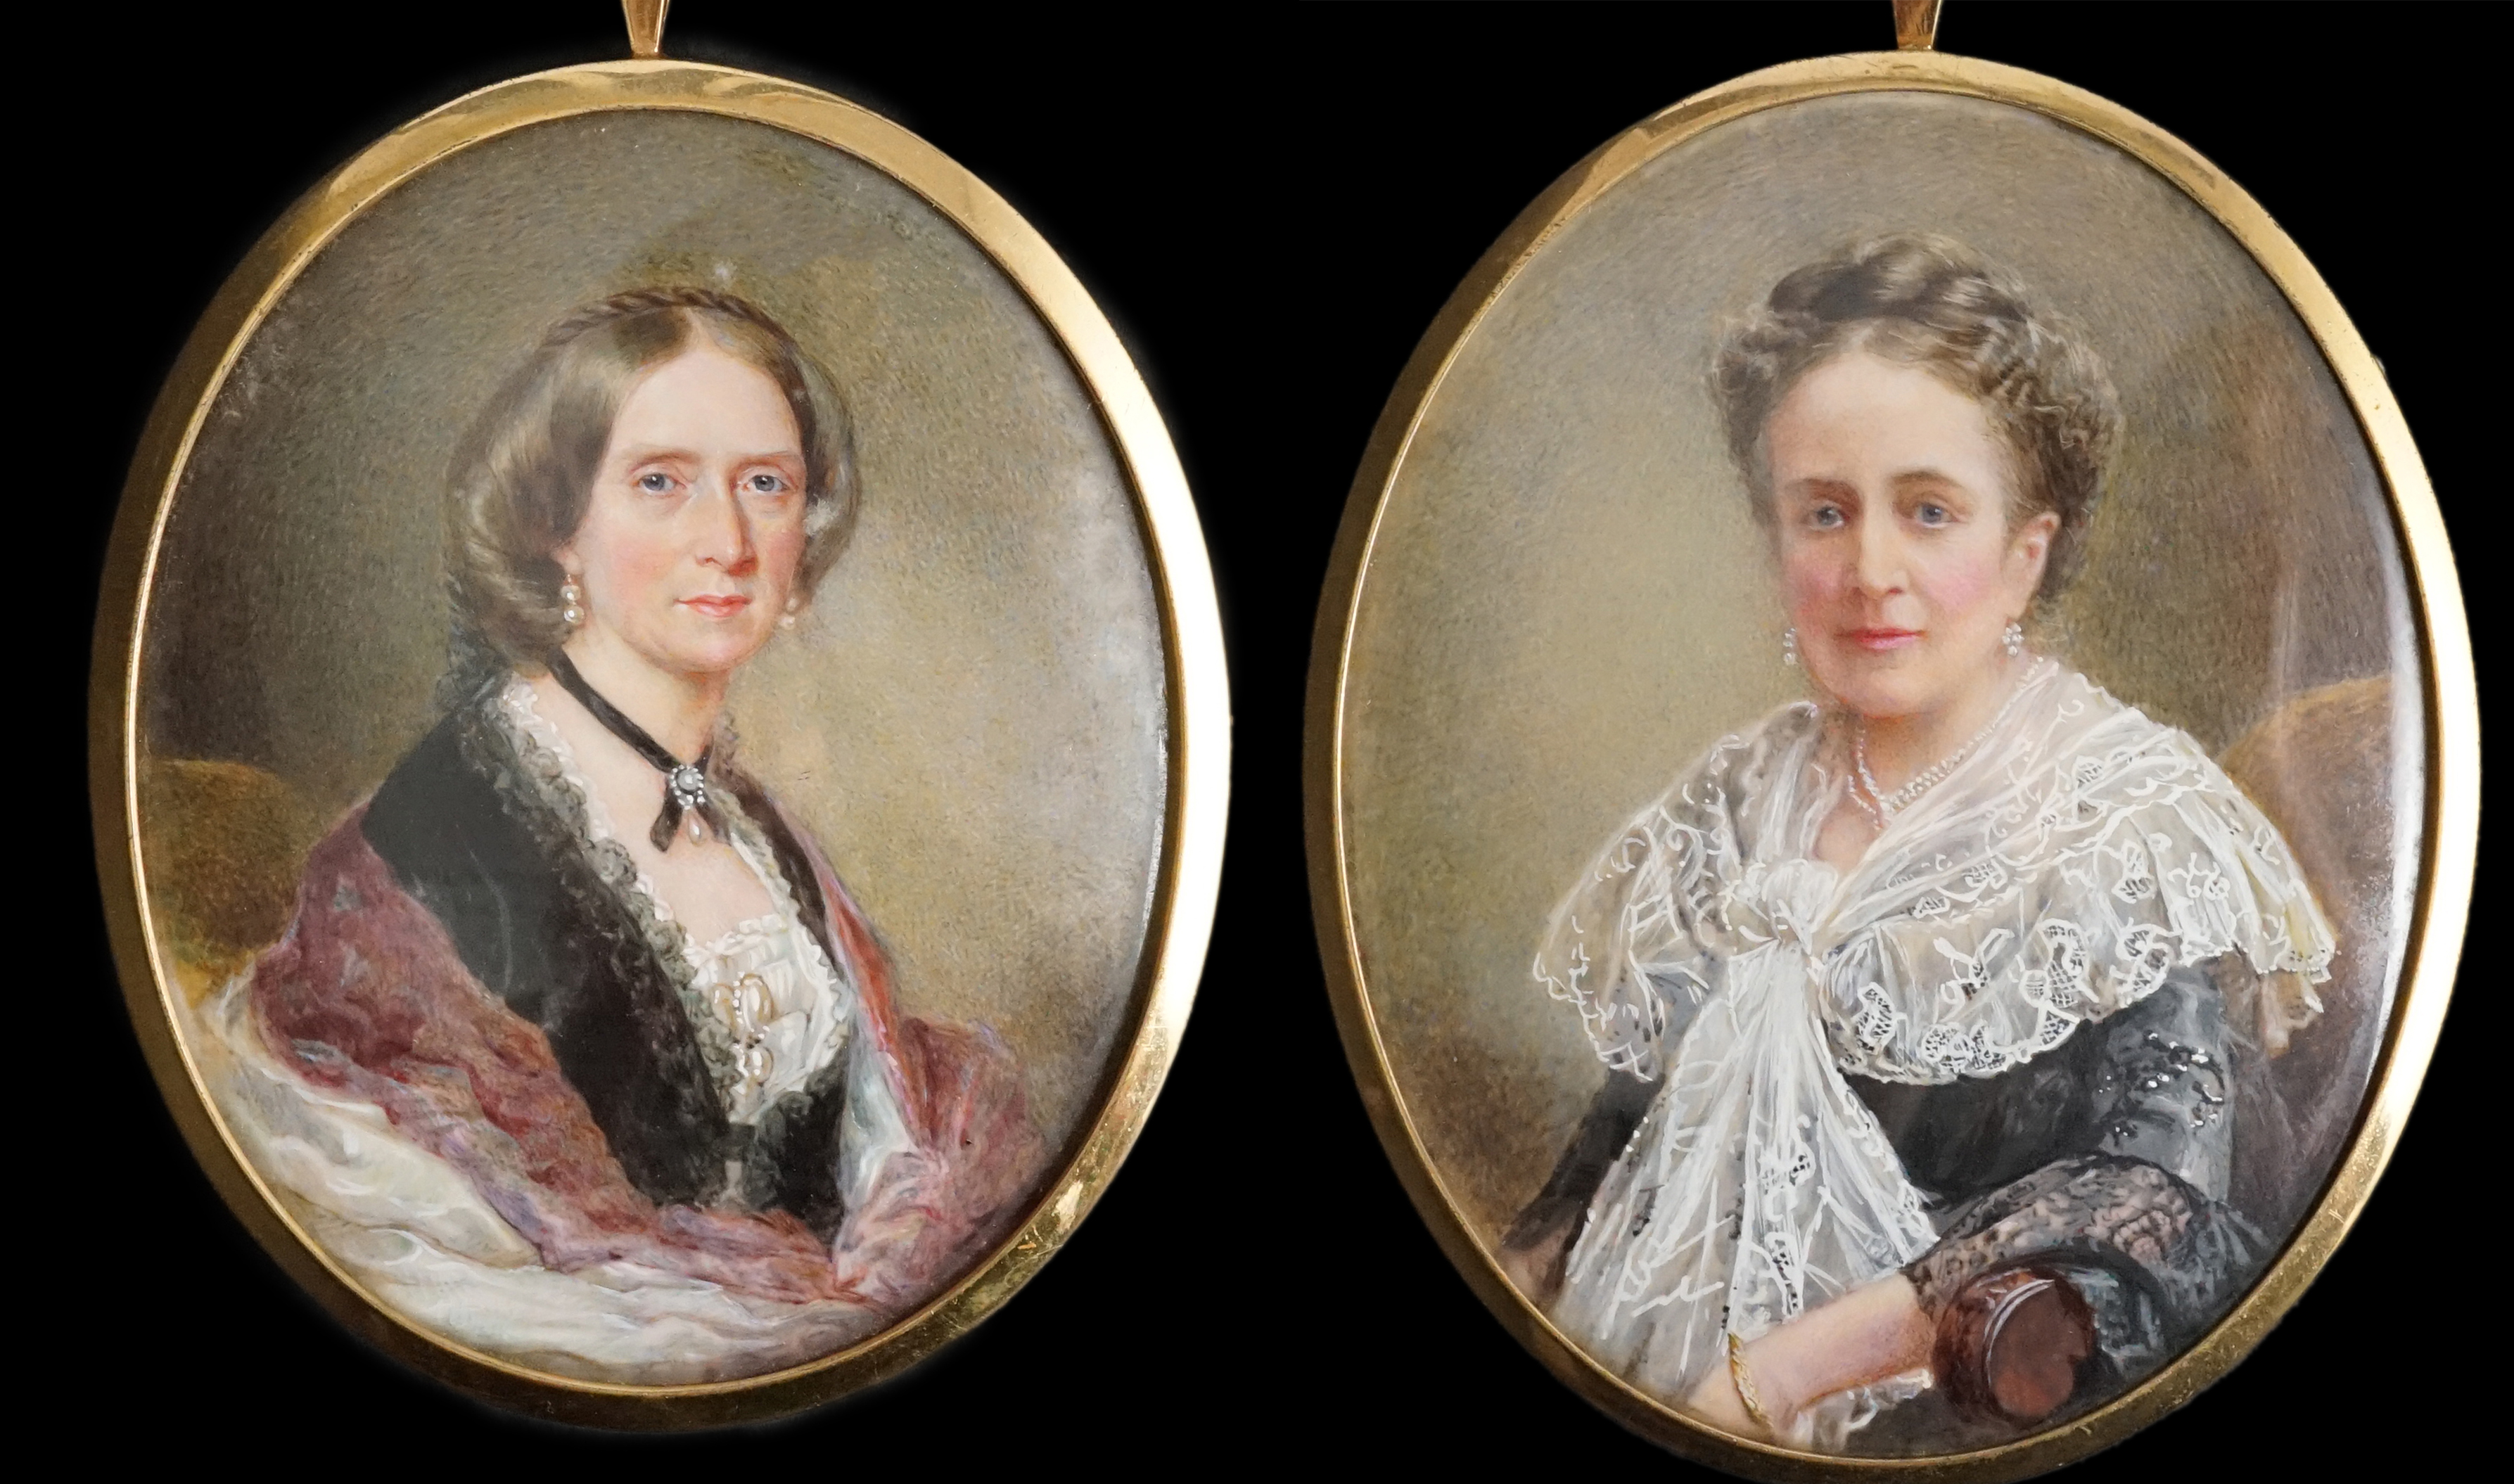 English School circa 1890 , Portrait miniatures of Lady Catherine Maria Arbuthnott and her daughter Josette Eliza Jane (Arbuthnot) Wollaston, watercolour on ivory, 8.5 x 7cm. CITES Submission reference K8681T3D